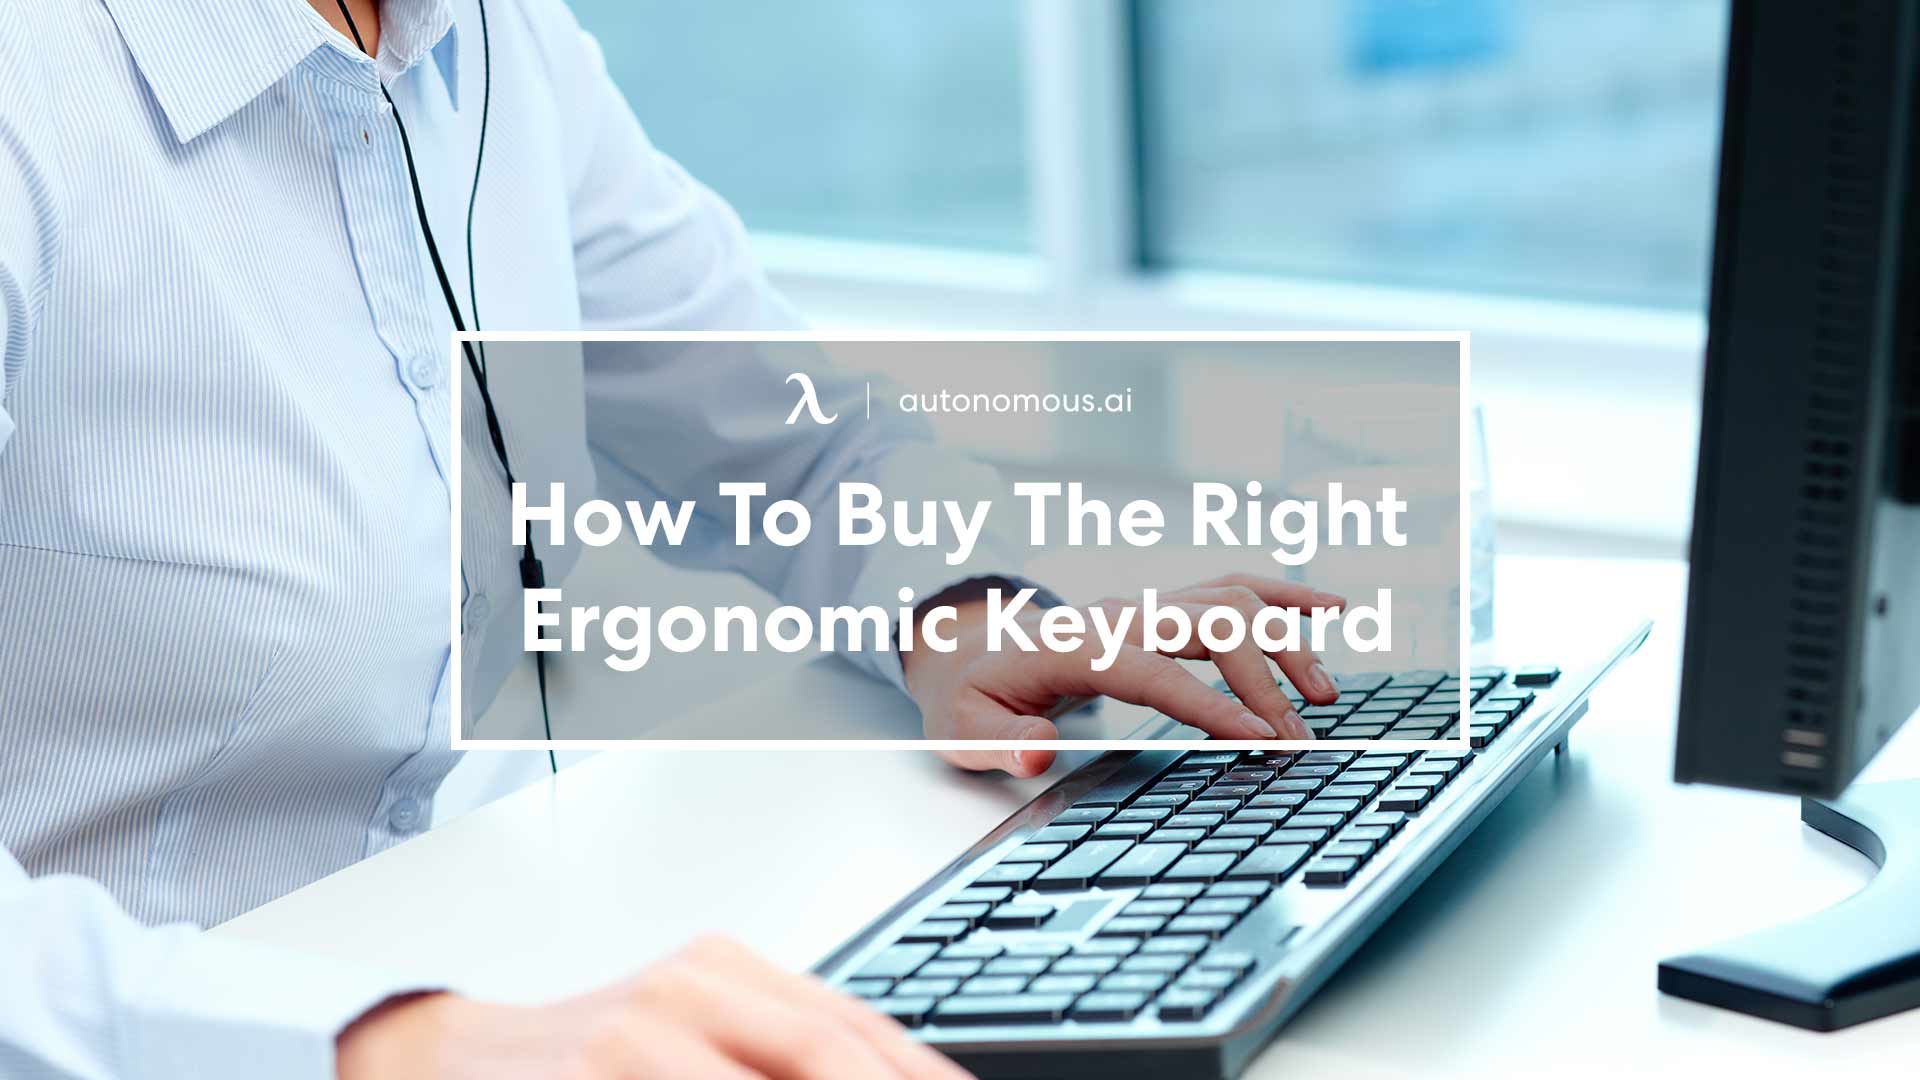 How to Buy the Right Ergonomic Keyboard